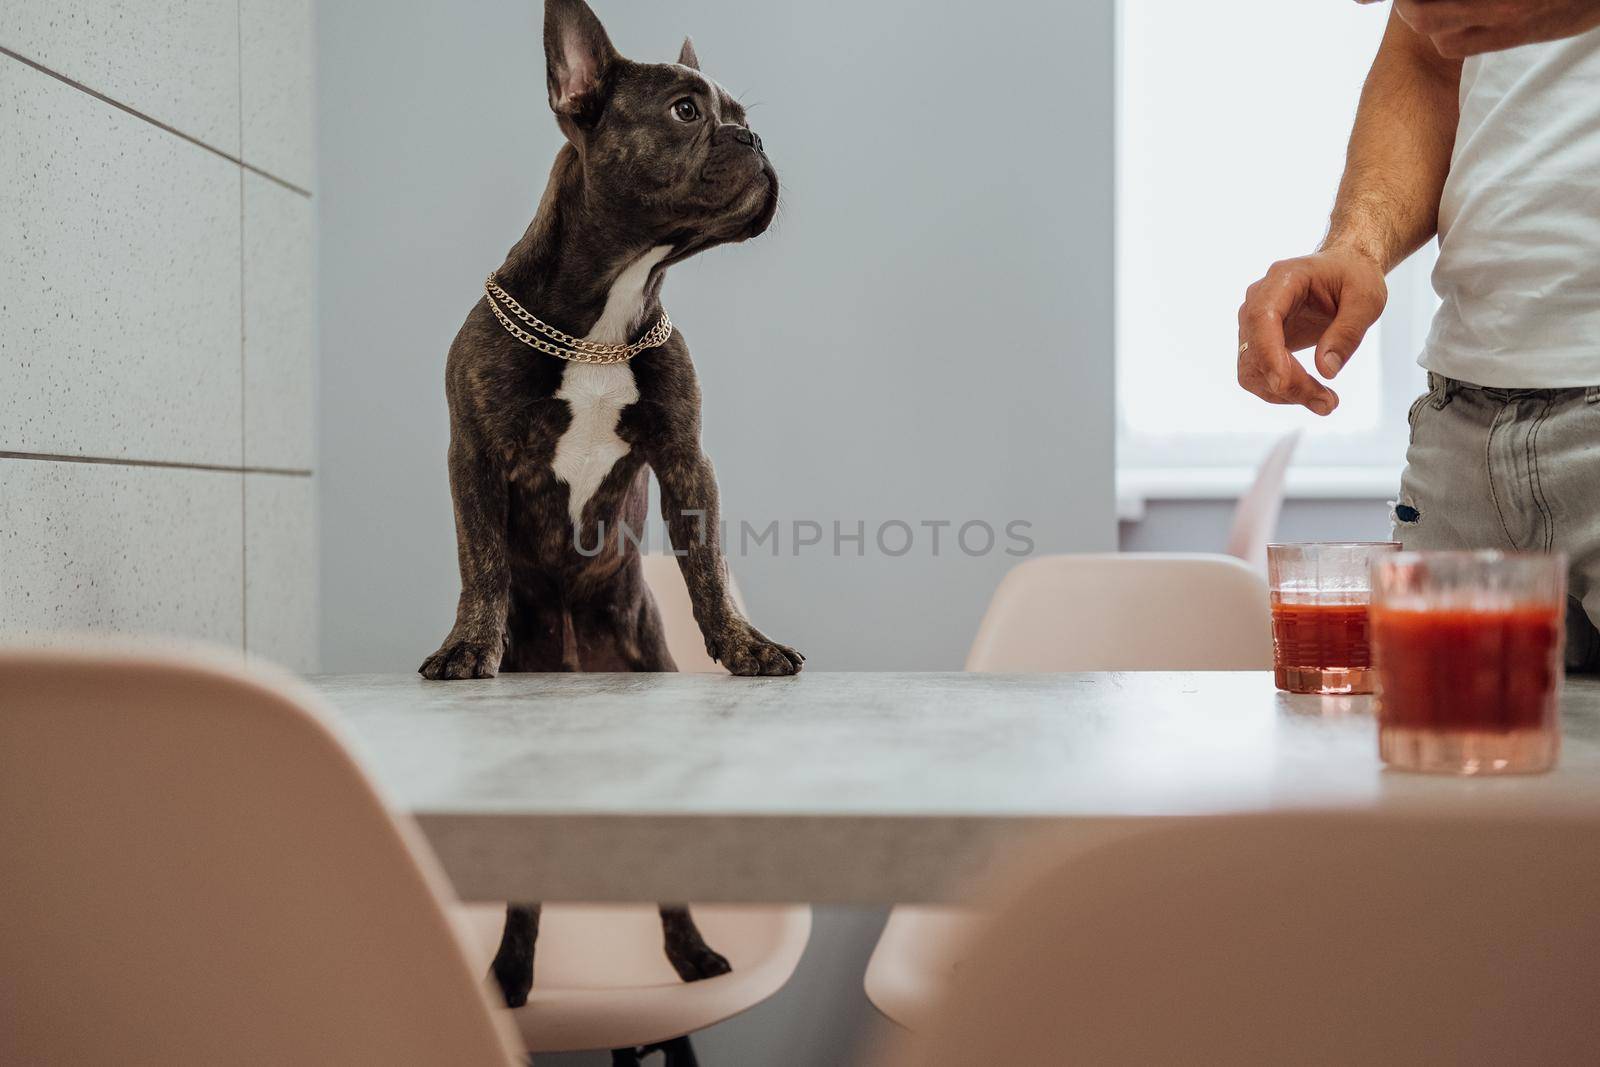 French Bulldog Climbed with His Front Paws on Kitchen Table and is Waiting for Human Food to Eat with Owner